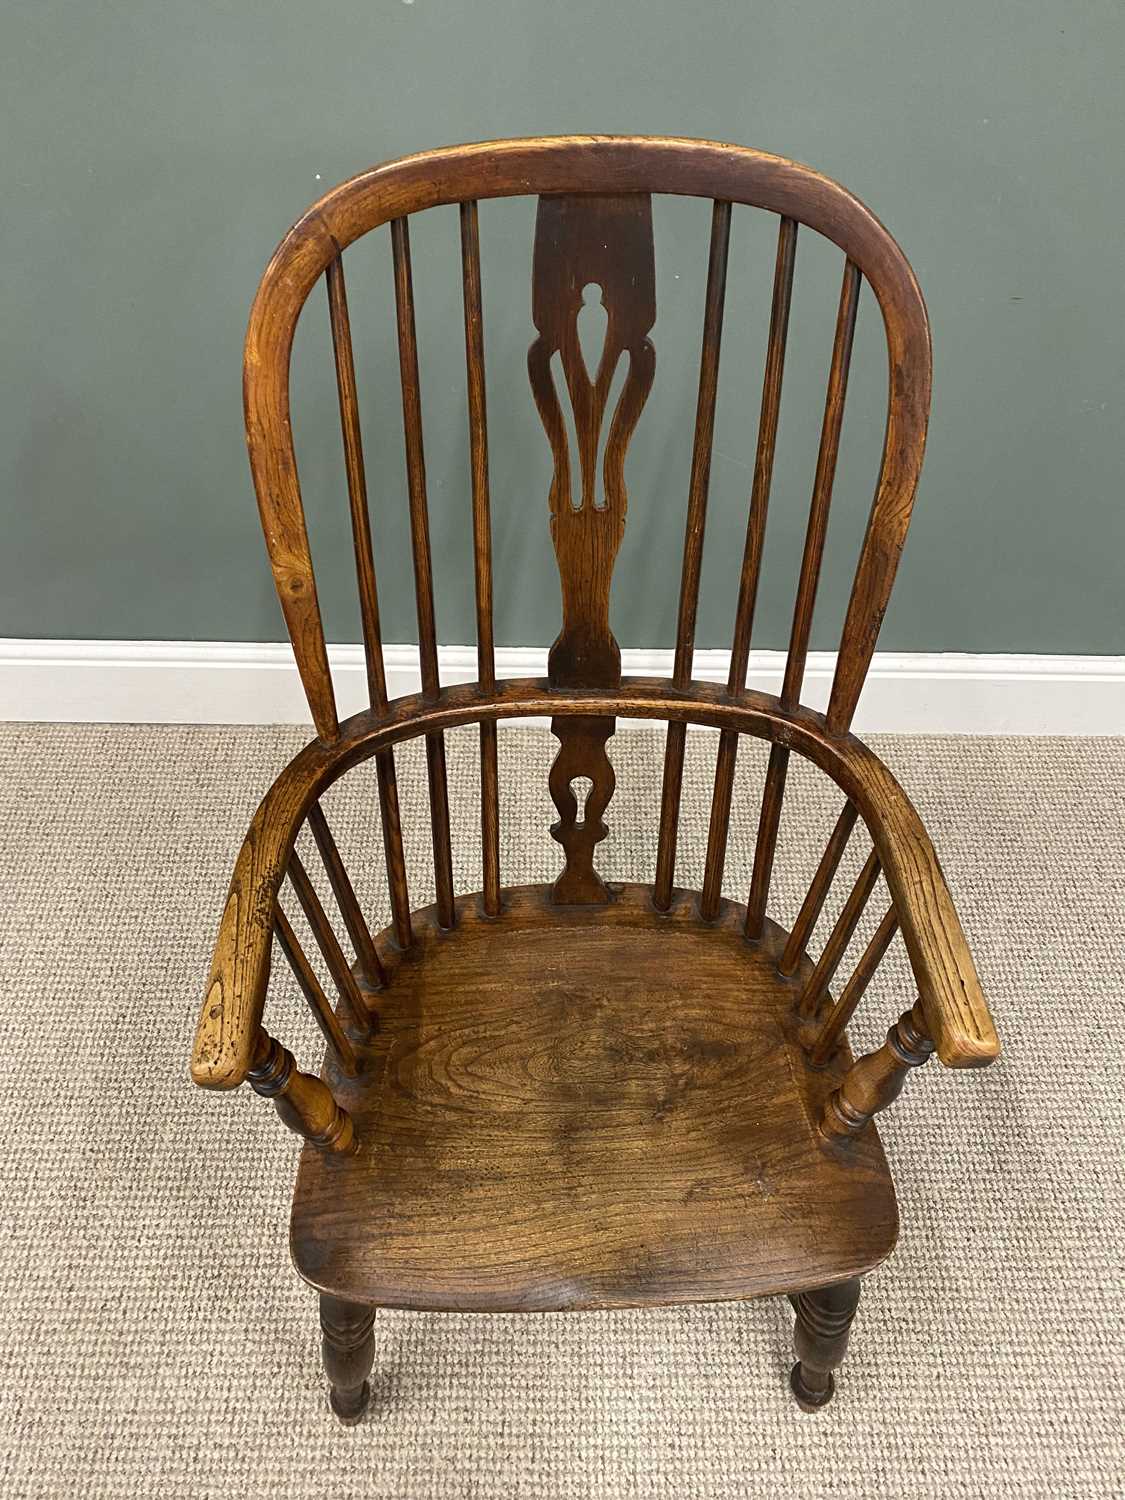 ANTIQUE OAK & ELM WINDSOR ARMCHAIR with crinoline stretcher, late 19th Century, having a high hoop - Image 2 of 3